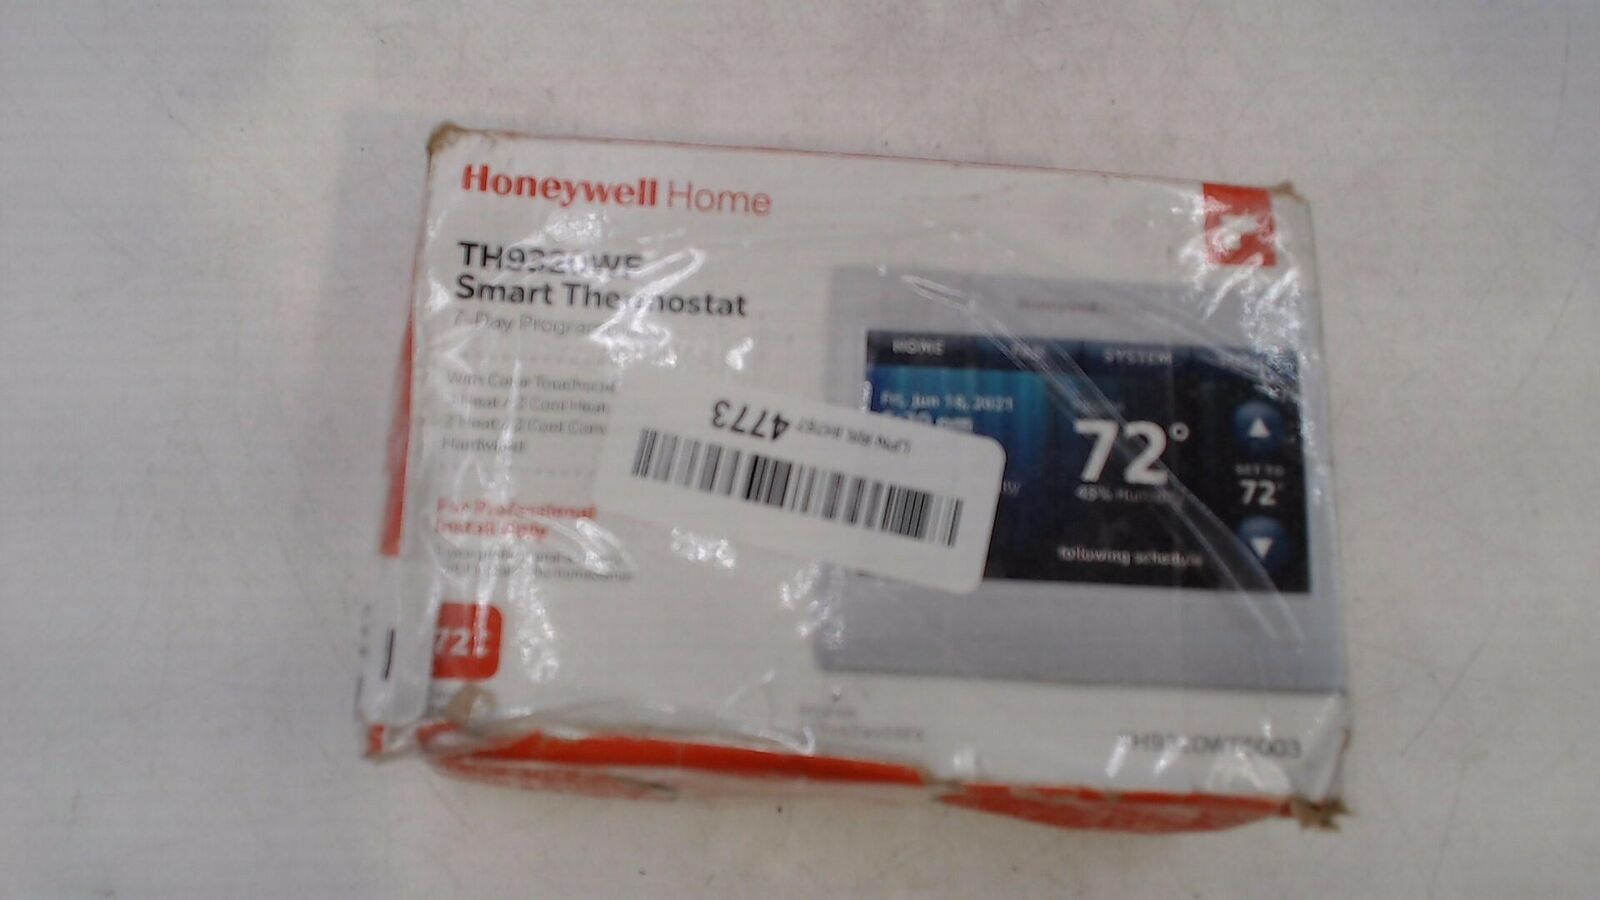 TH9320WF5003 - OEM Upgraded Replacement for Honeywell Wi-Fi 7-Day Programmable